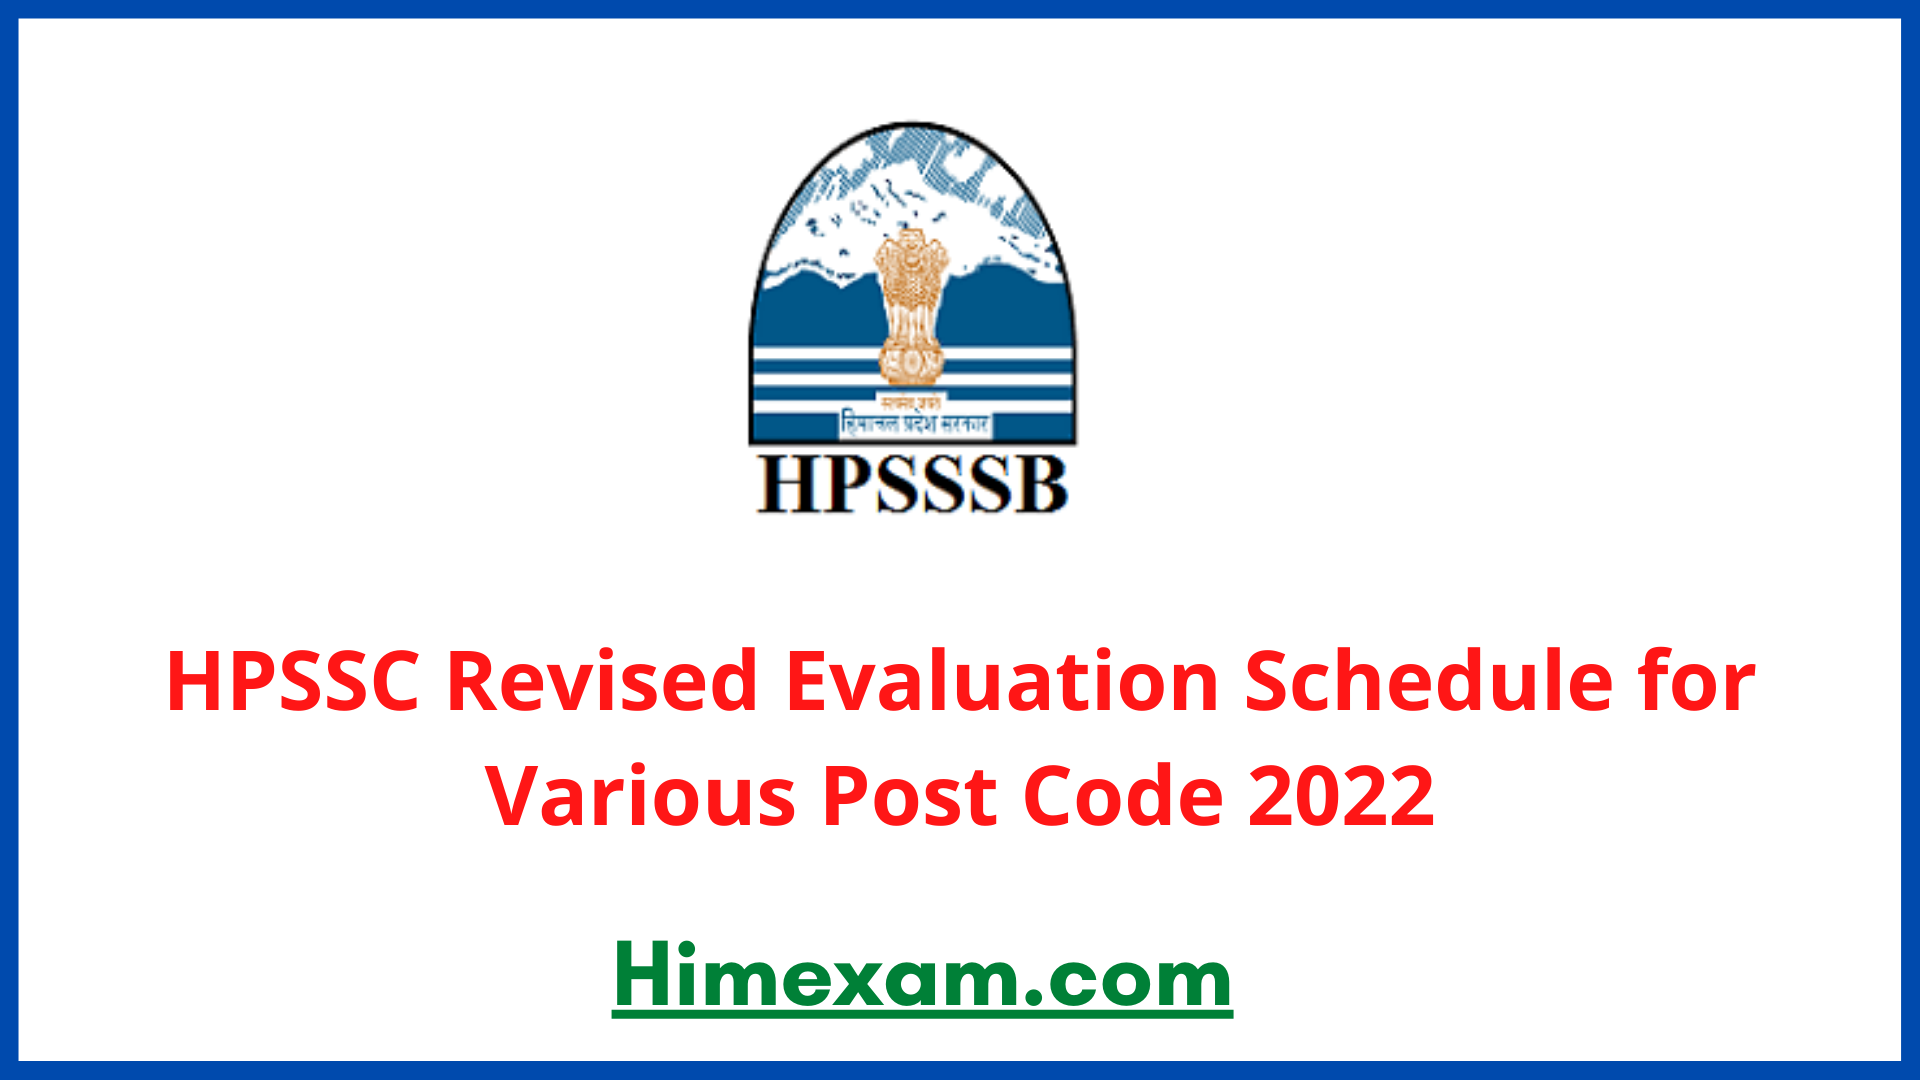 HPSSC Revised Evaluation Schedule for Various Post Code 2022